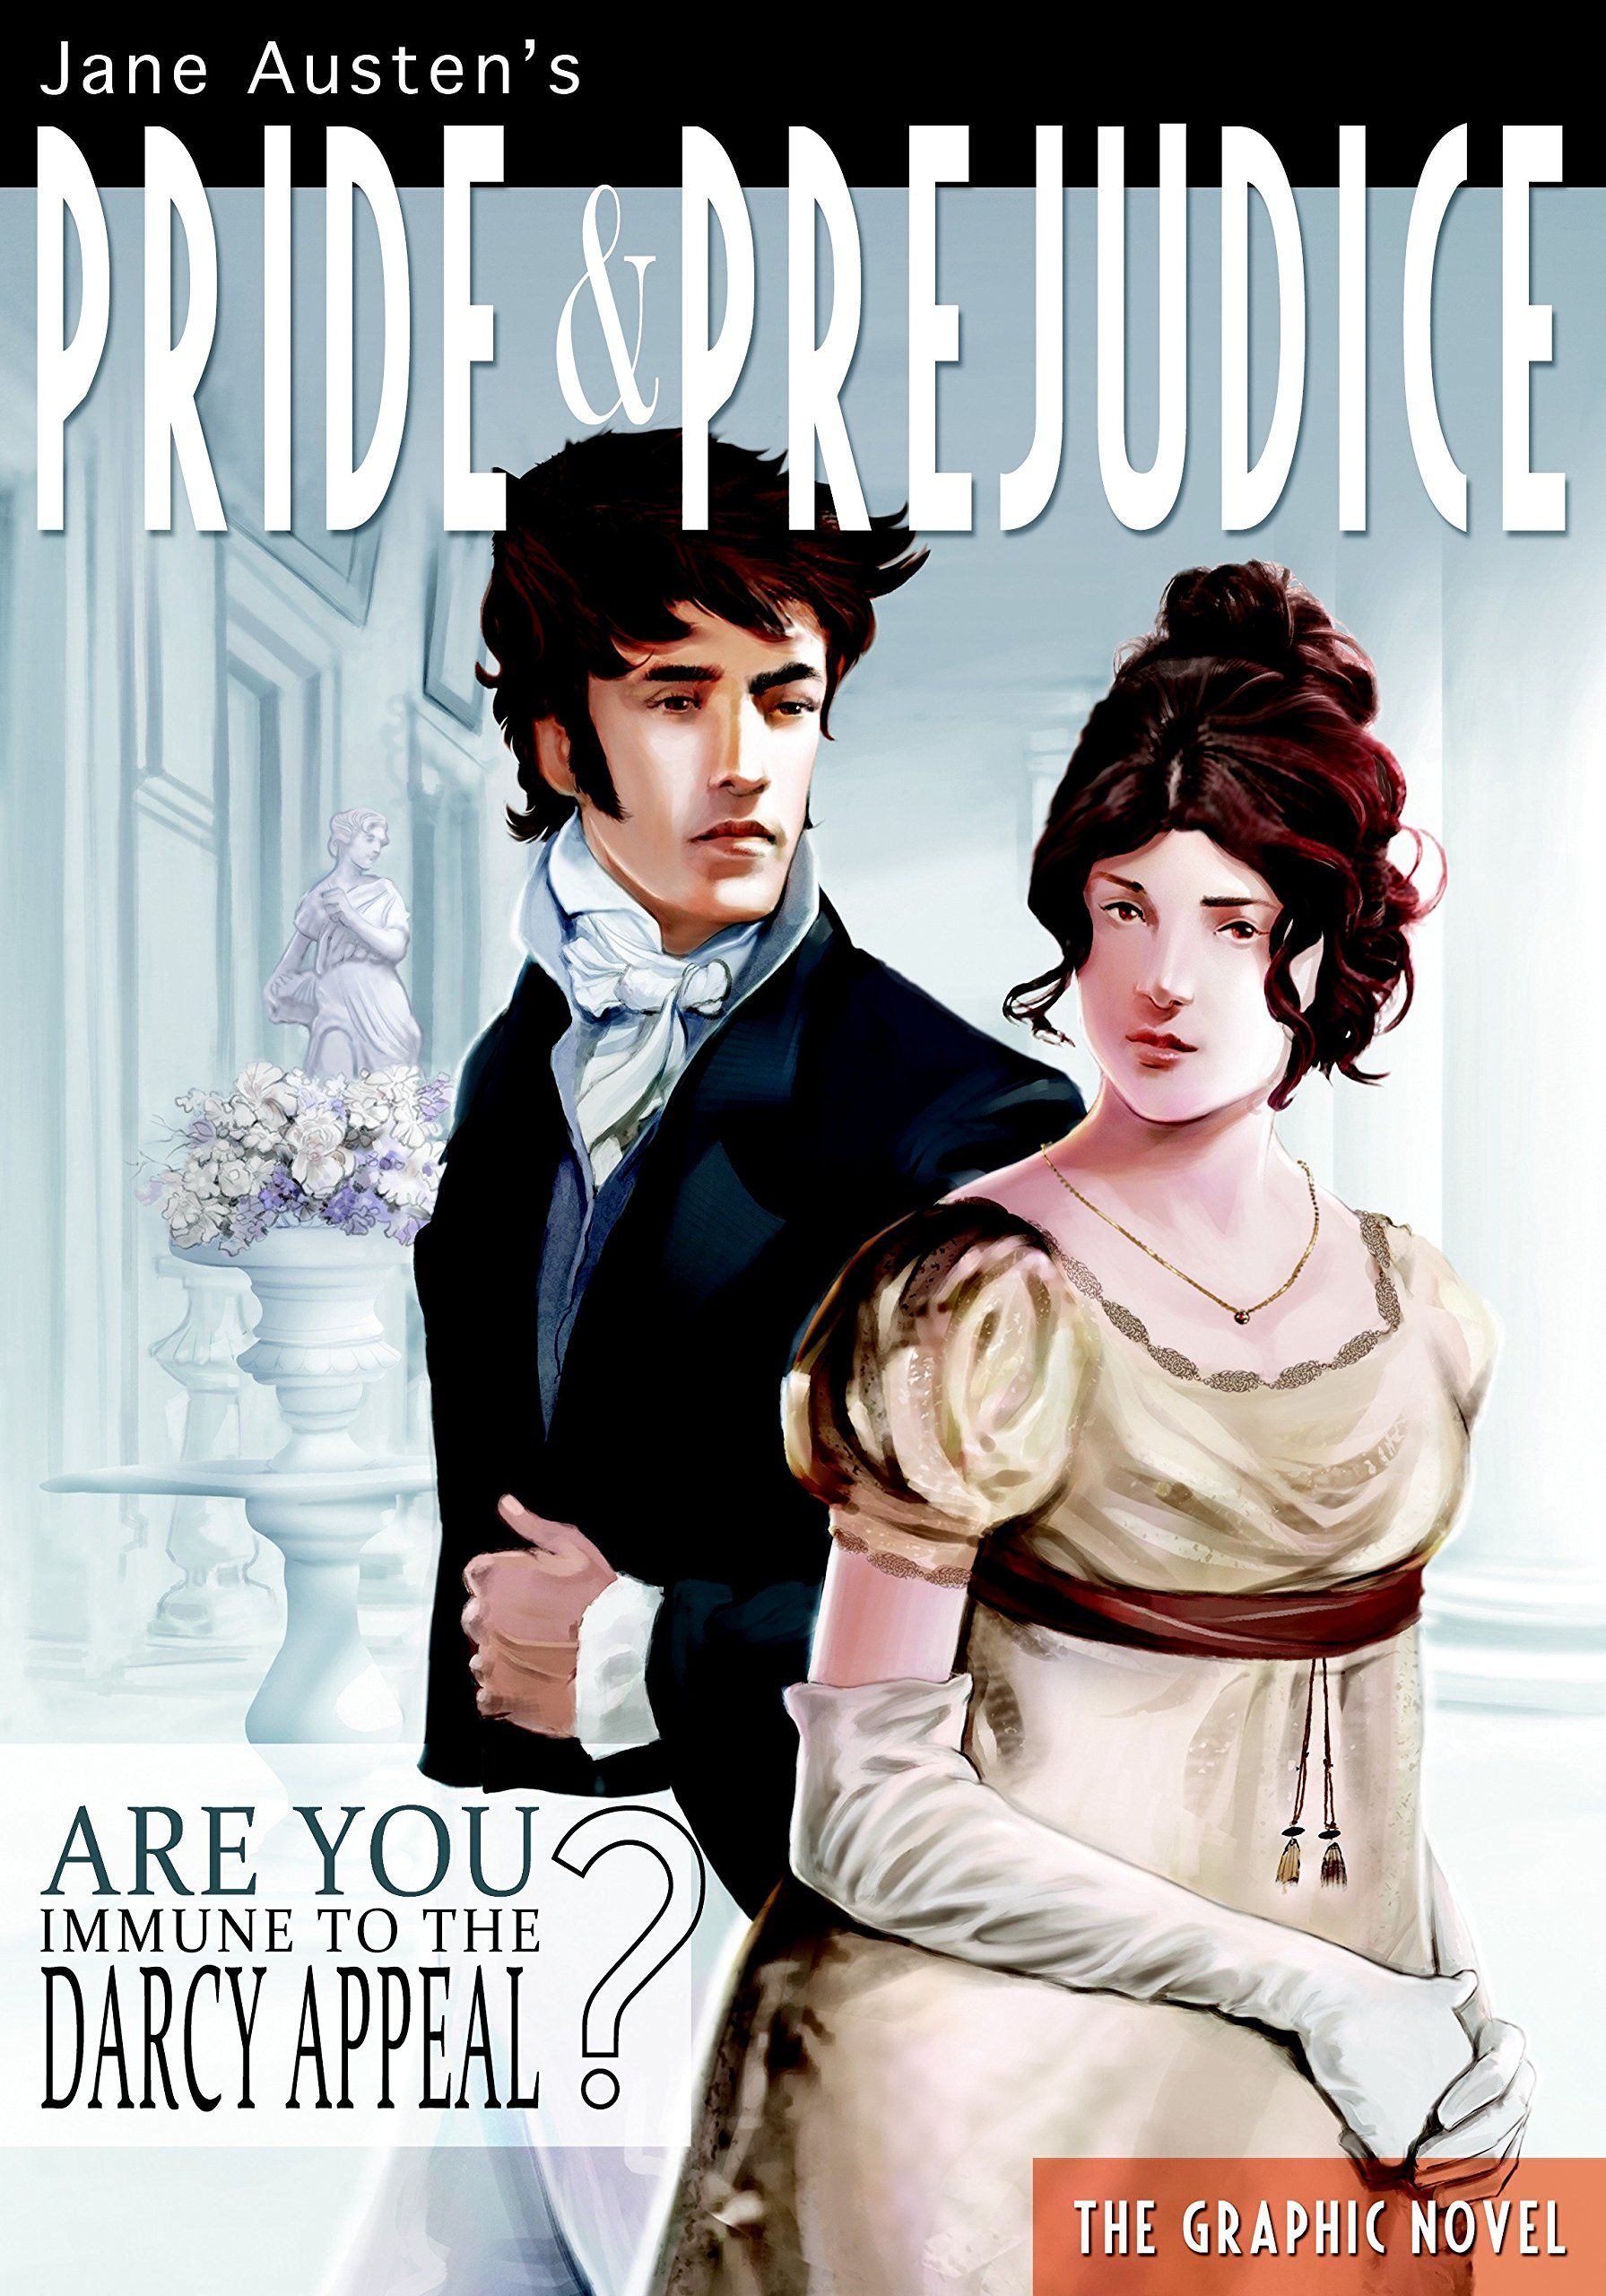 cover of pride and prejudice graphic novel